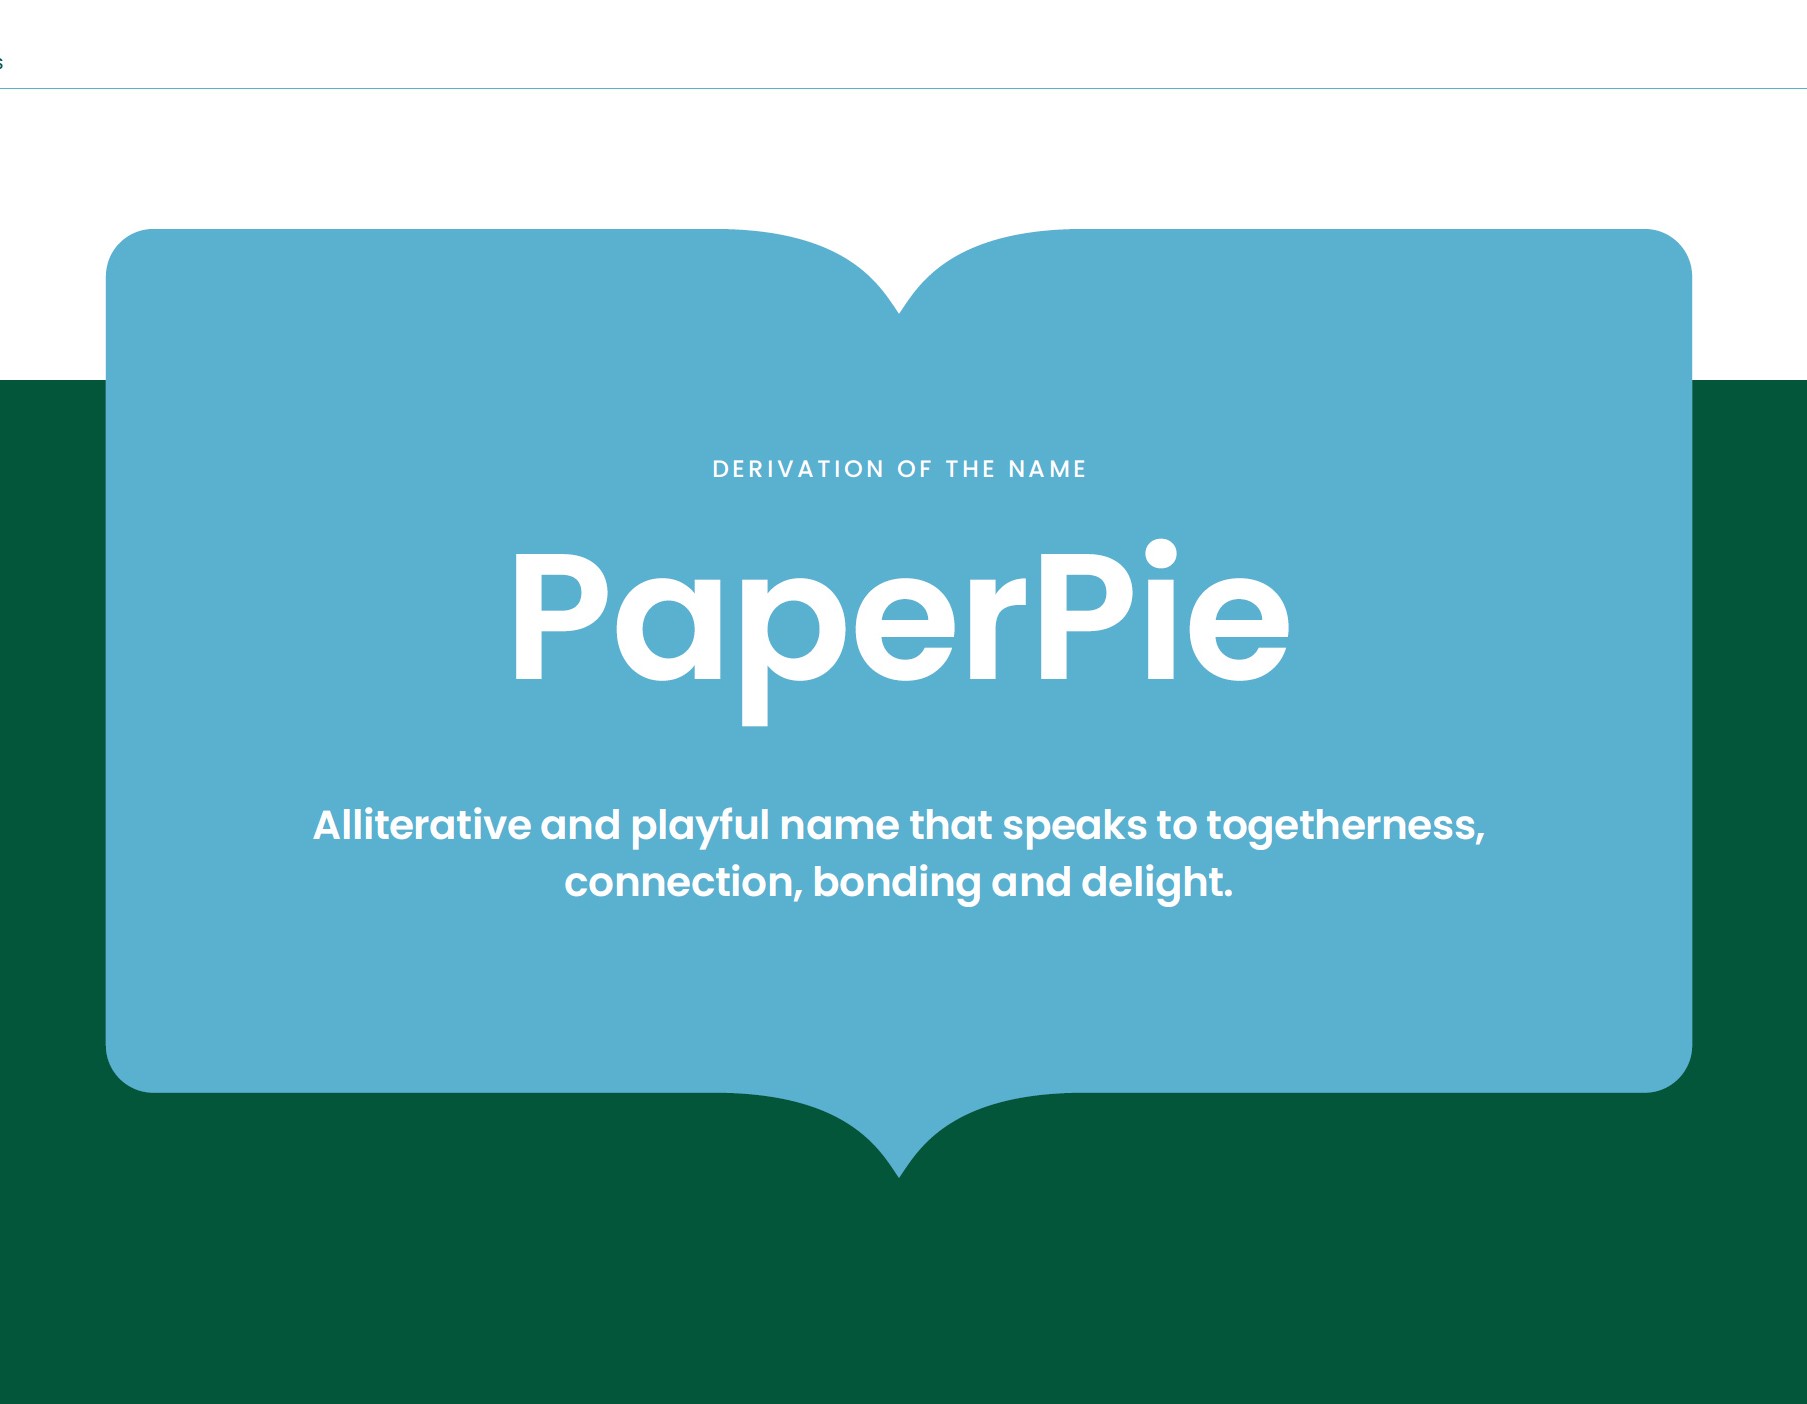 PaperPie, company name developed by Catchword